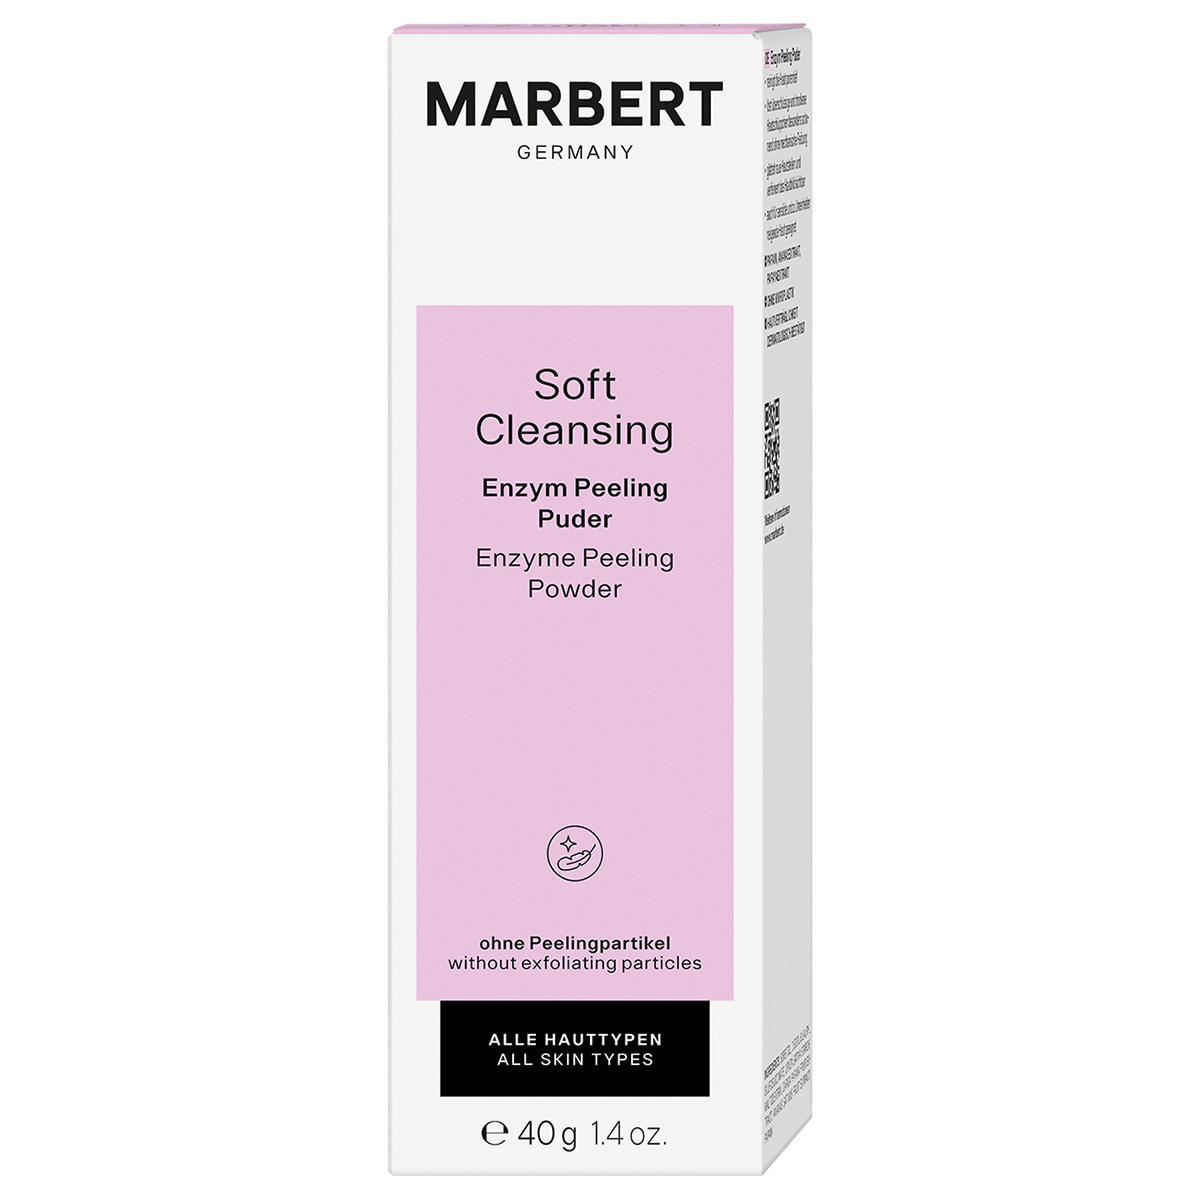 Marbert Soft Cleansing Enzyme Peeling Poudre 40 g - 2